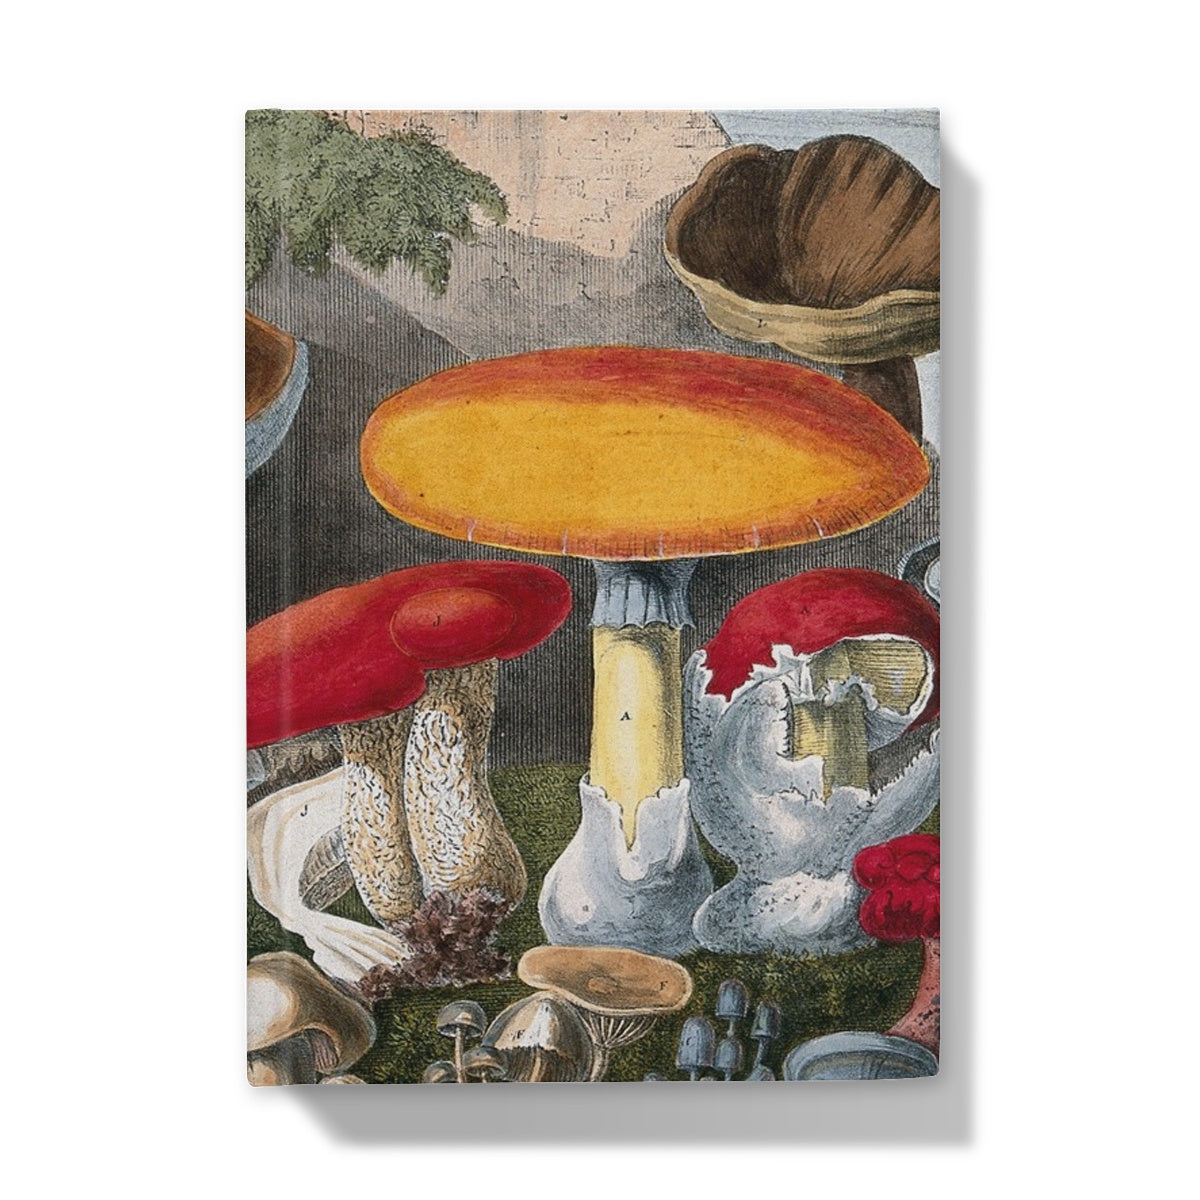 Edible Fungi by A. Cornillon, ca. 1827, after Prieur - Hardback Journal